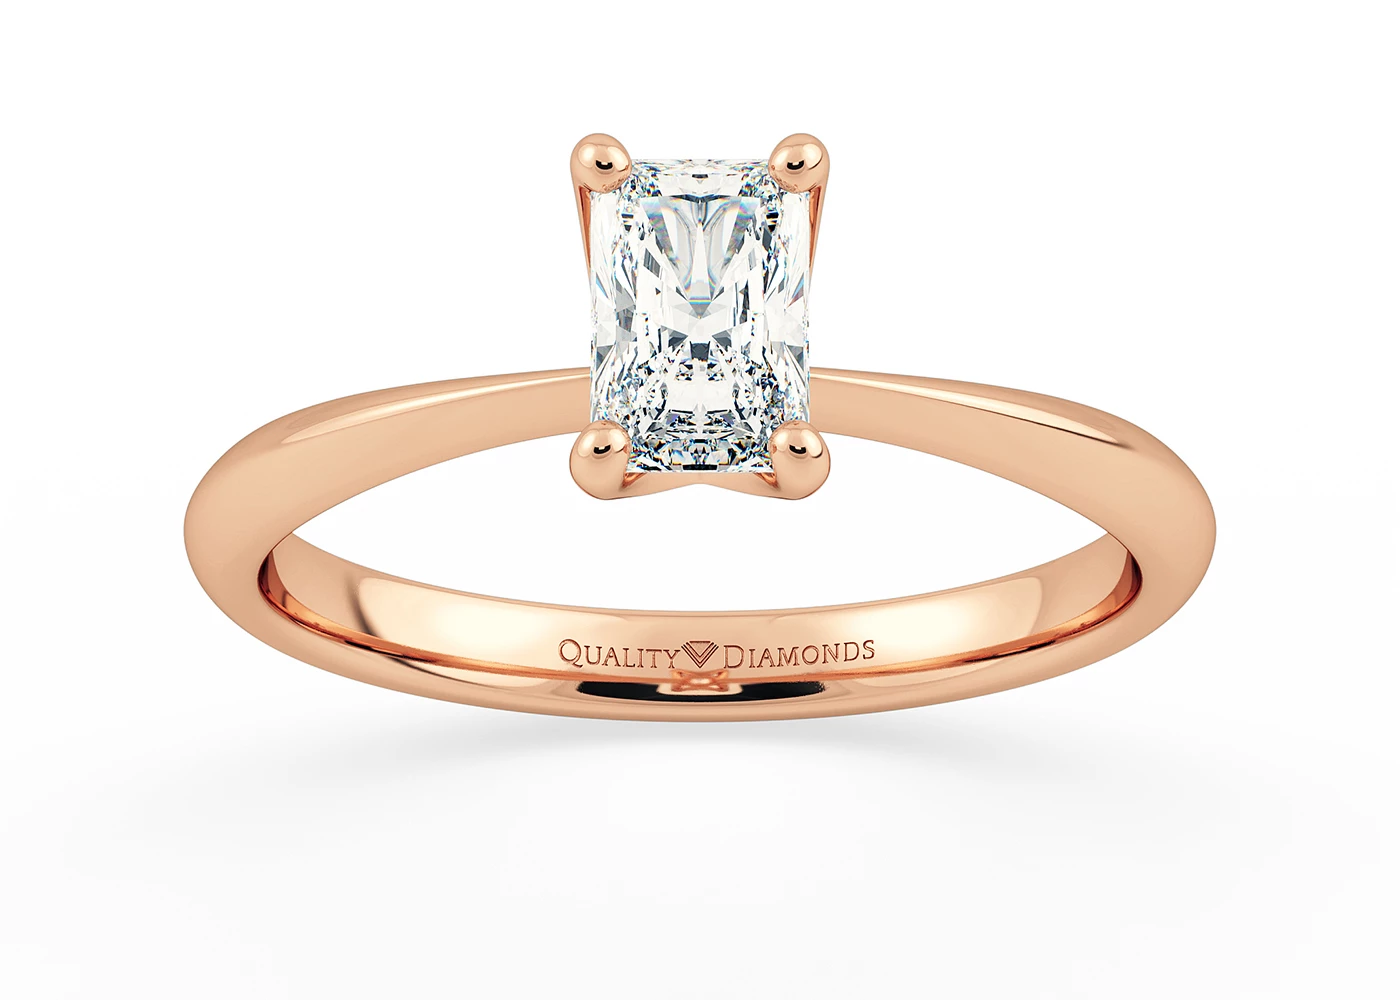 One Carat Radiant Solitaire Diamond Engagement Ring in 18K Rose Gold